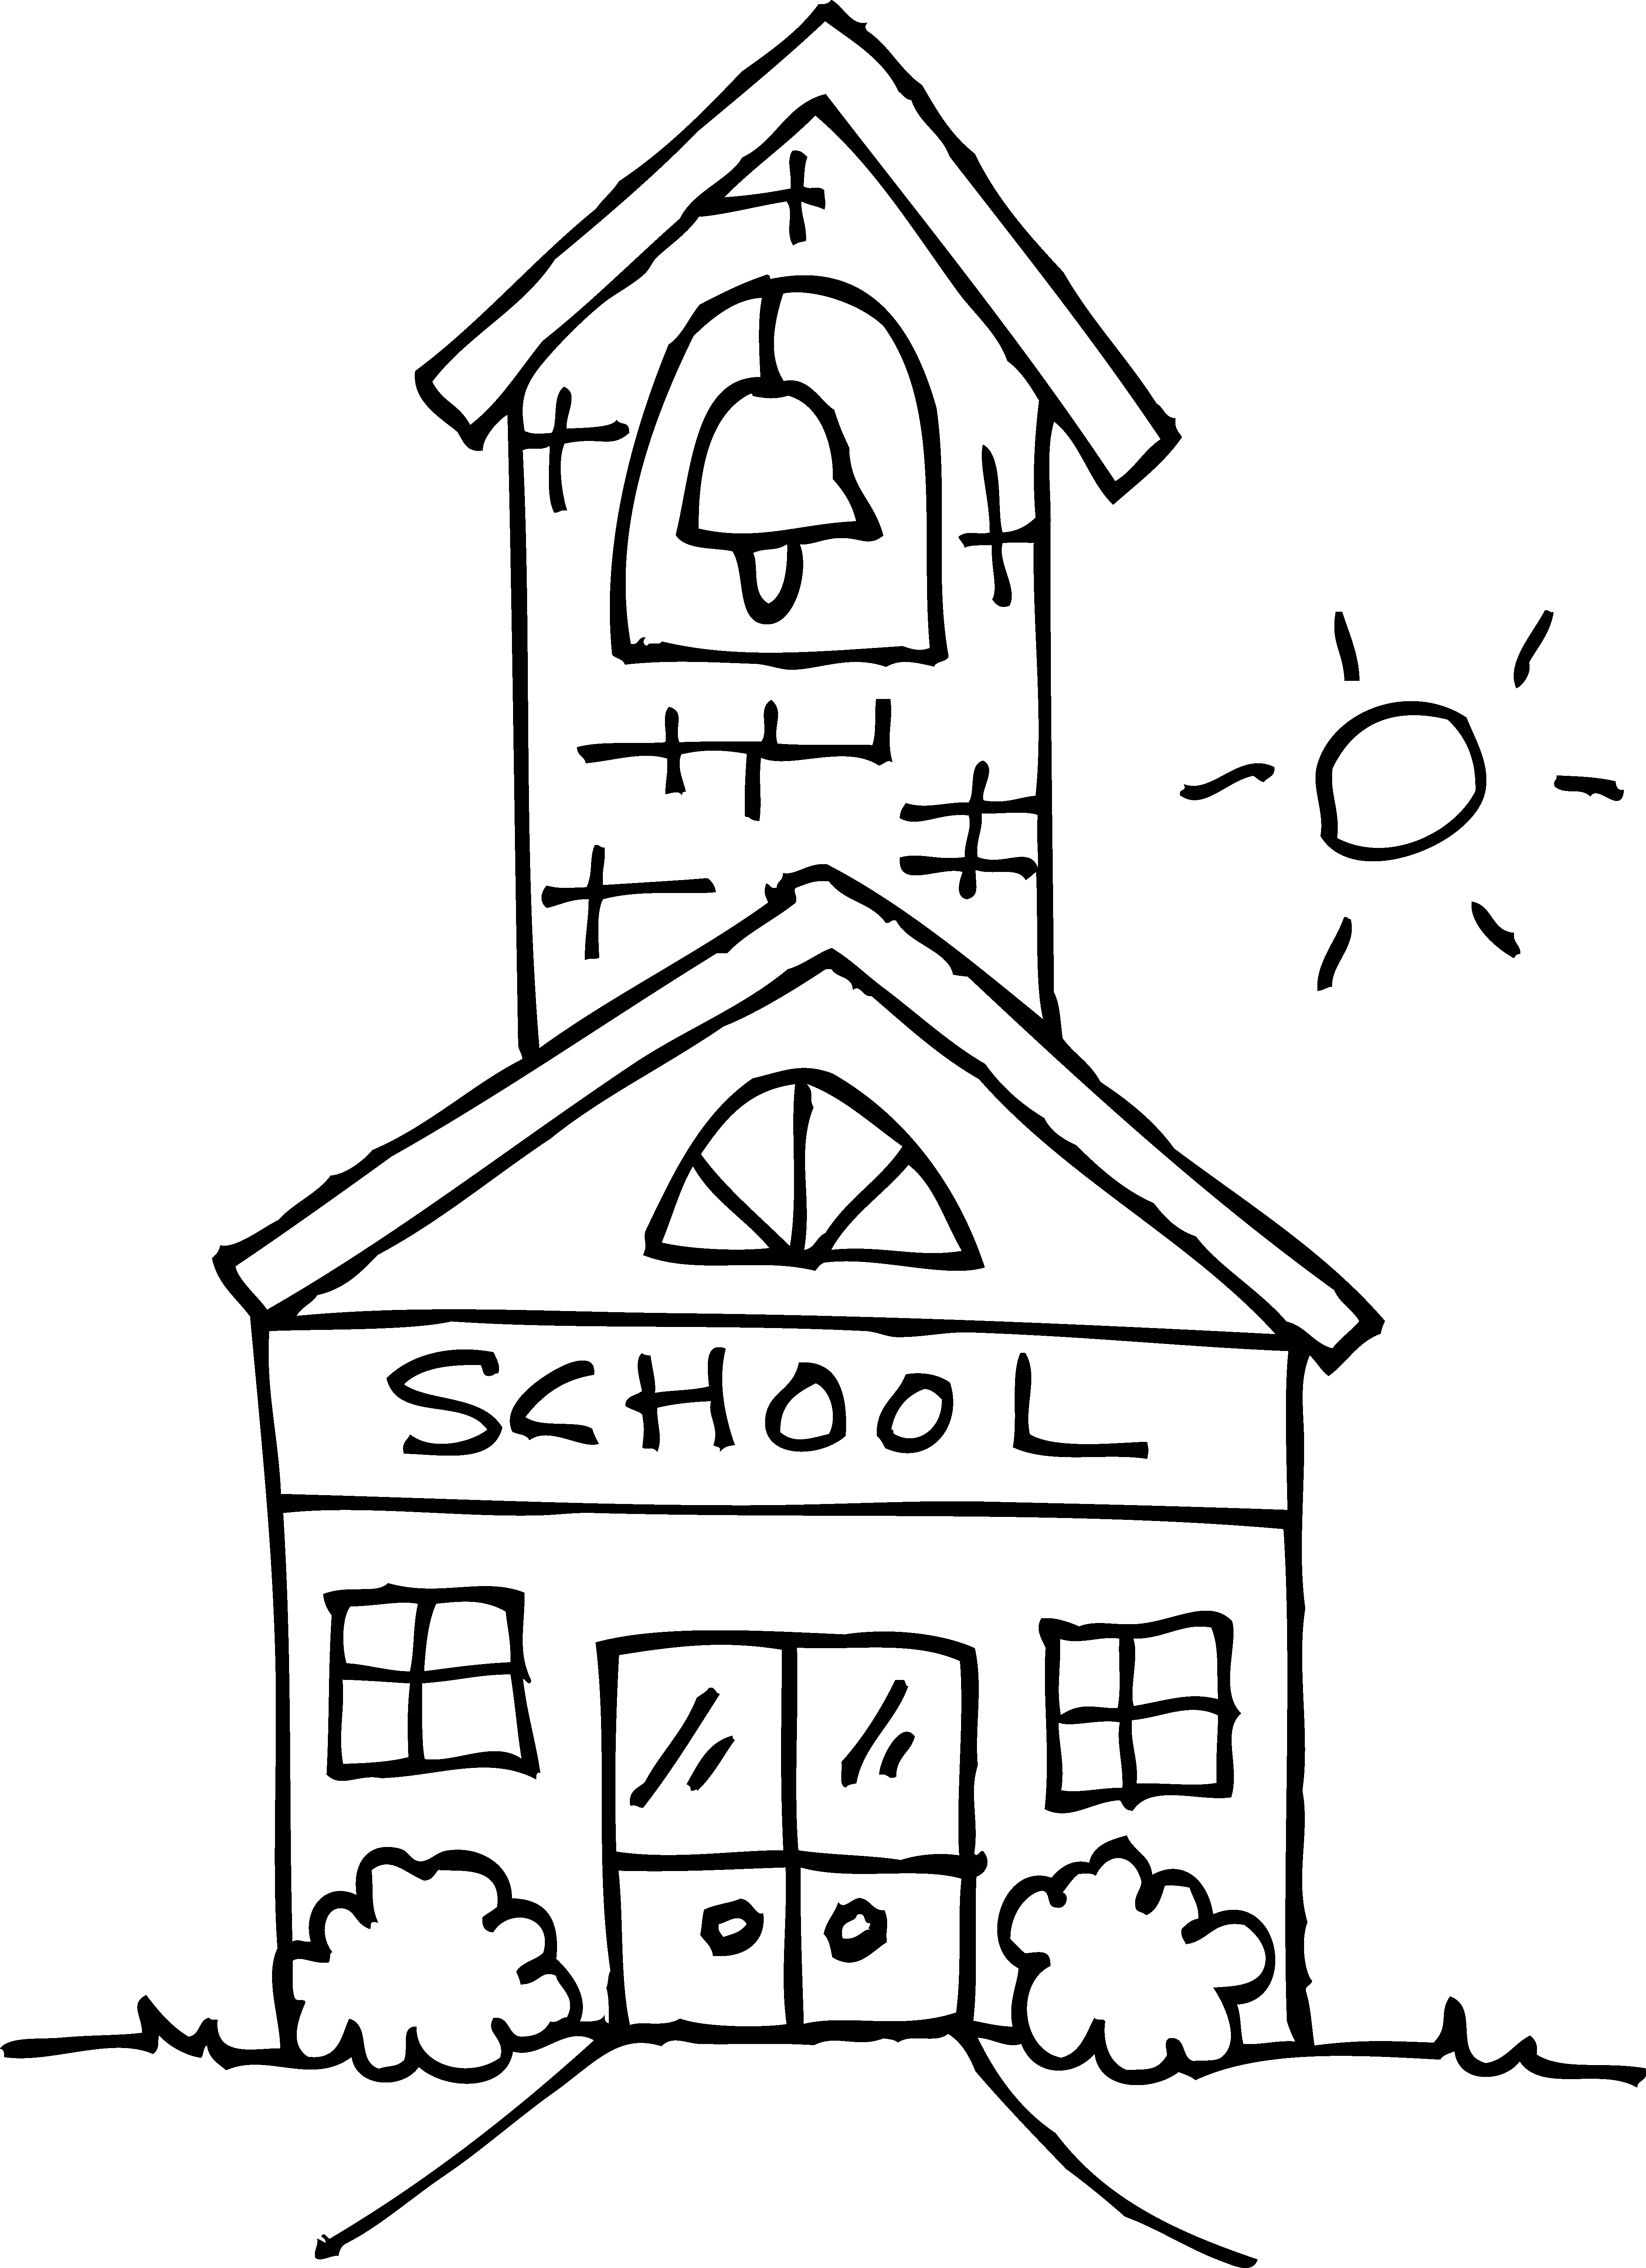 Welcome To School Clipart In 